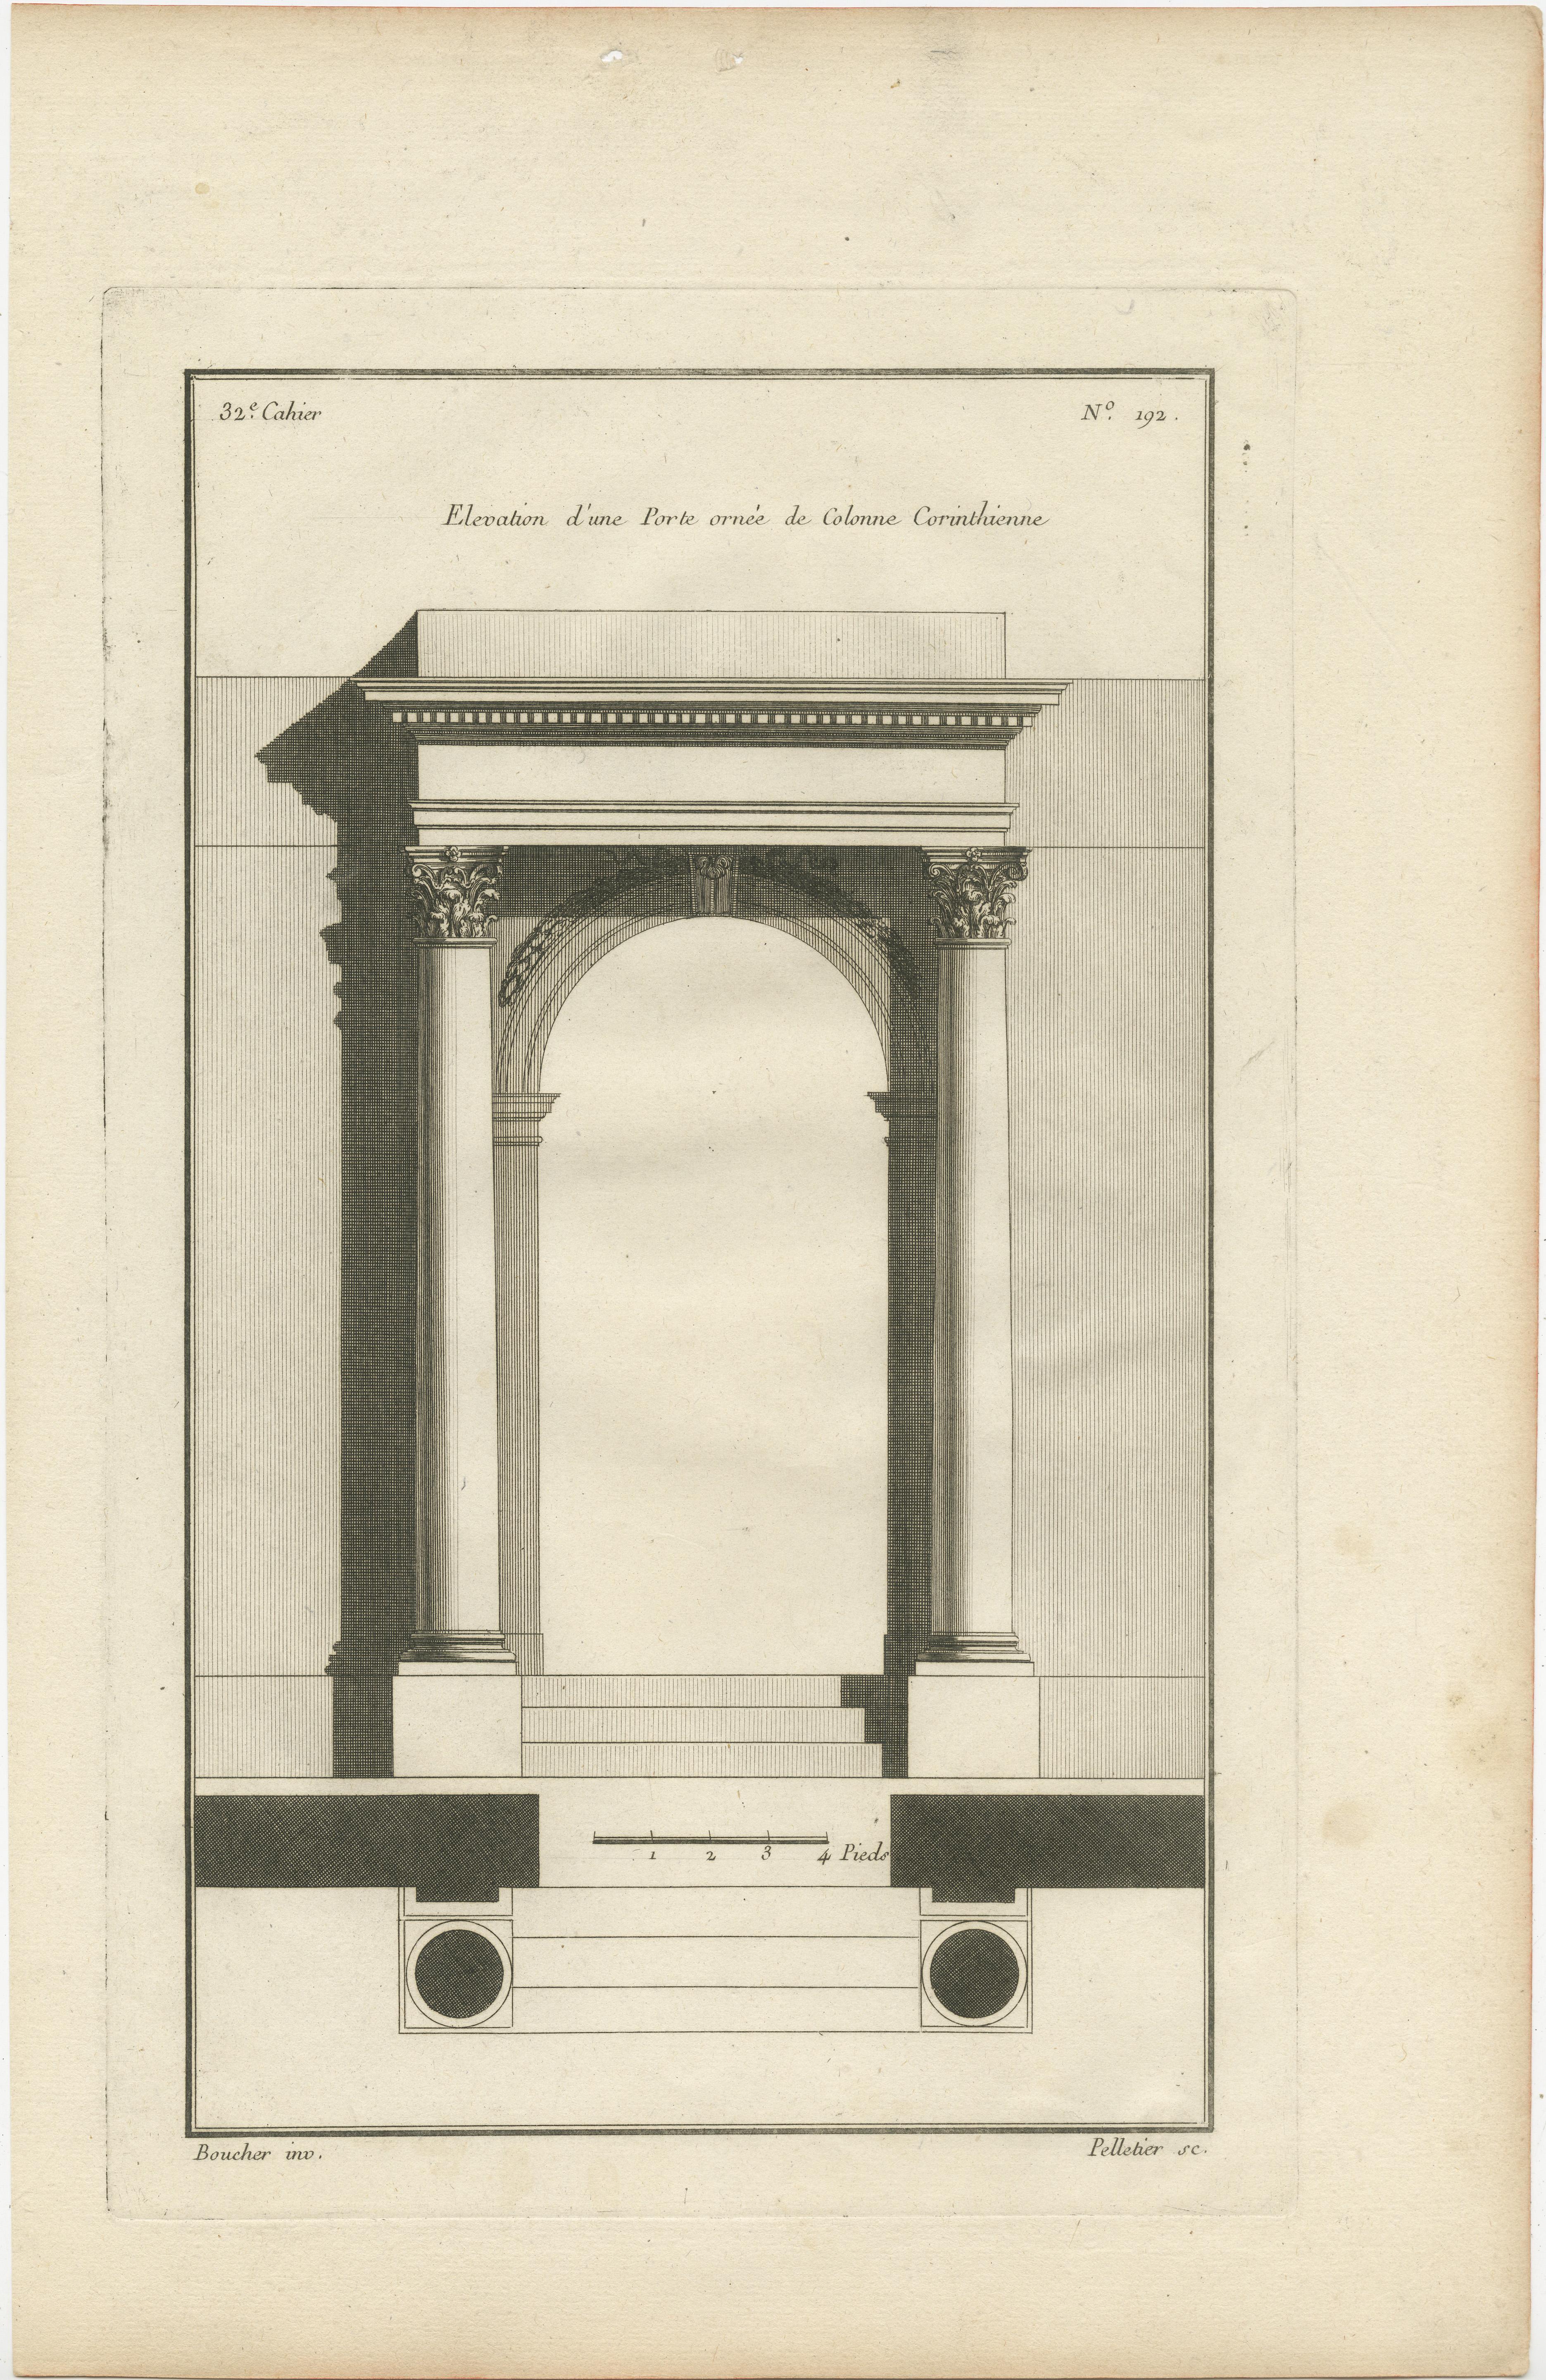 These prints are detailed architectural engravings by Jean-François de Neufforge, reflecting his meticulous approach to classical architecture during the 18th century.

1. The first print is an elevation view of an ornate doorway framed by